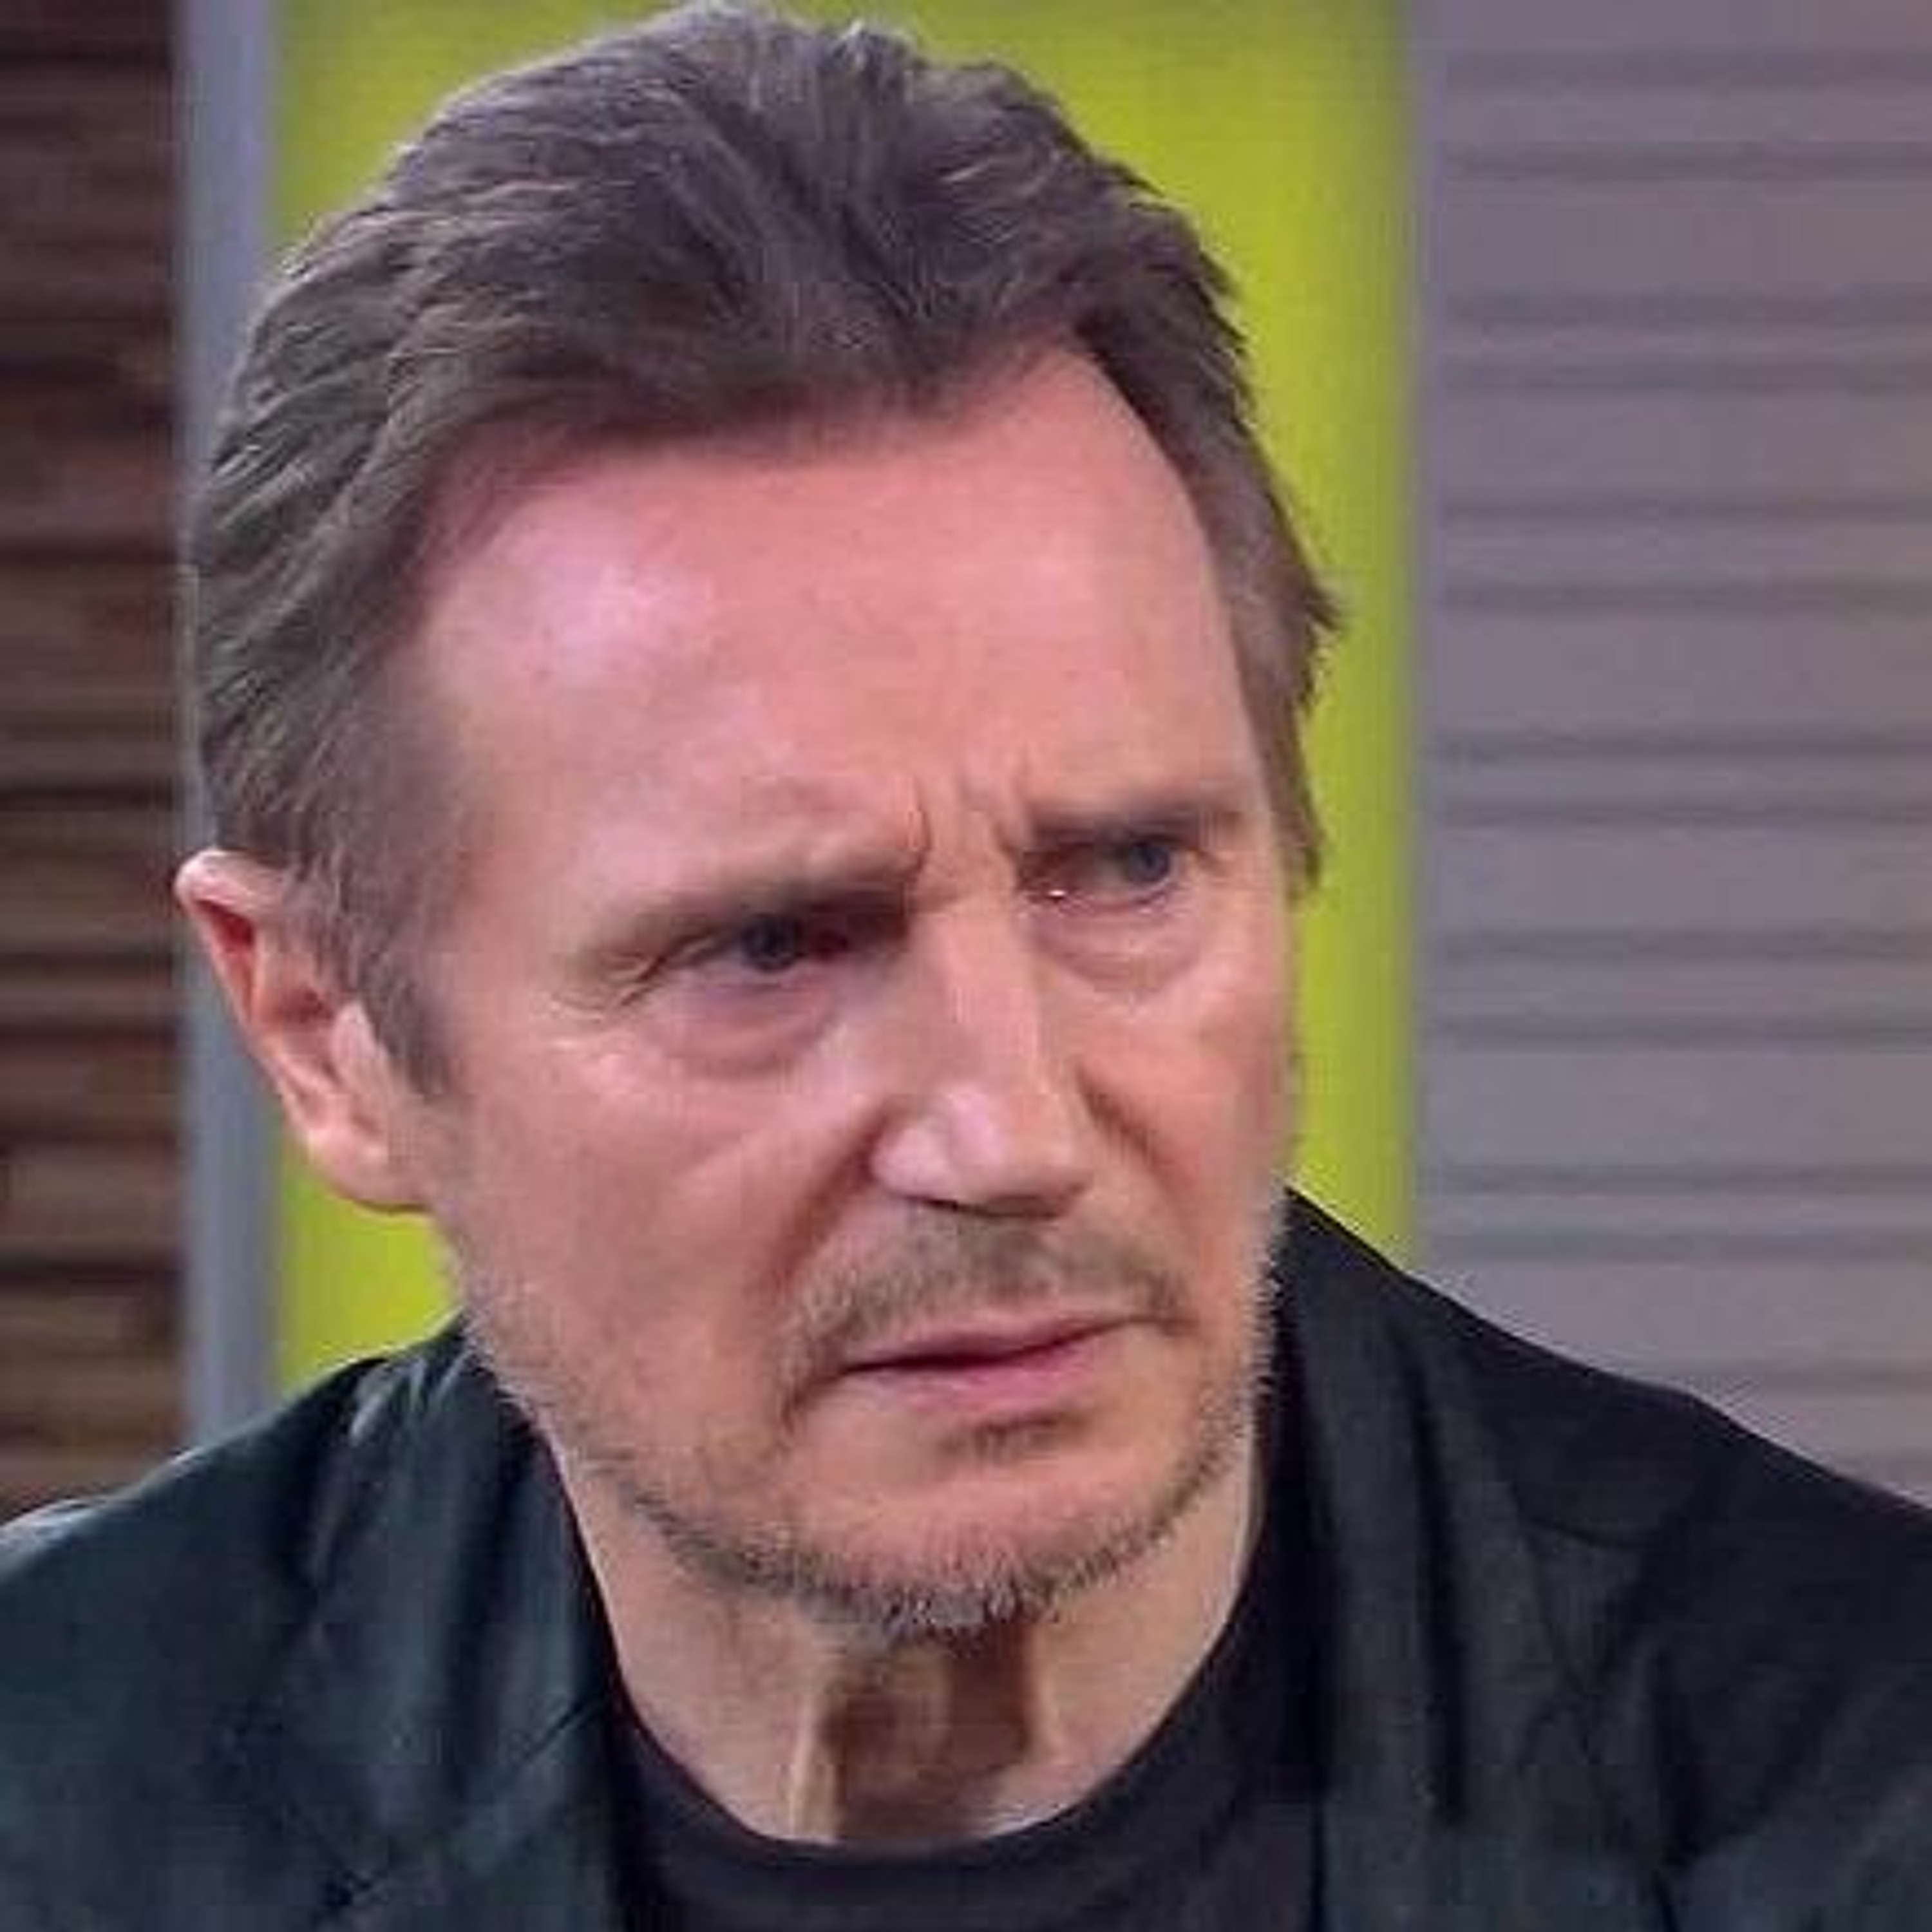 Liam Neeson And Green New Deal Or Raw Deal